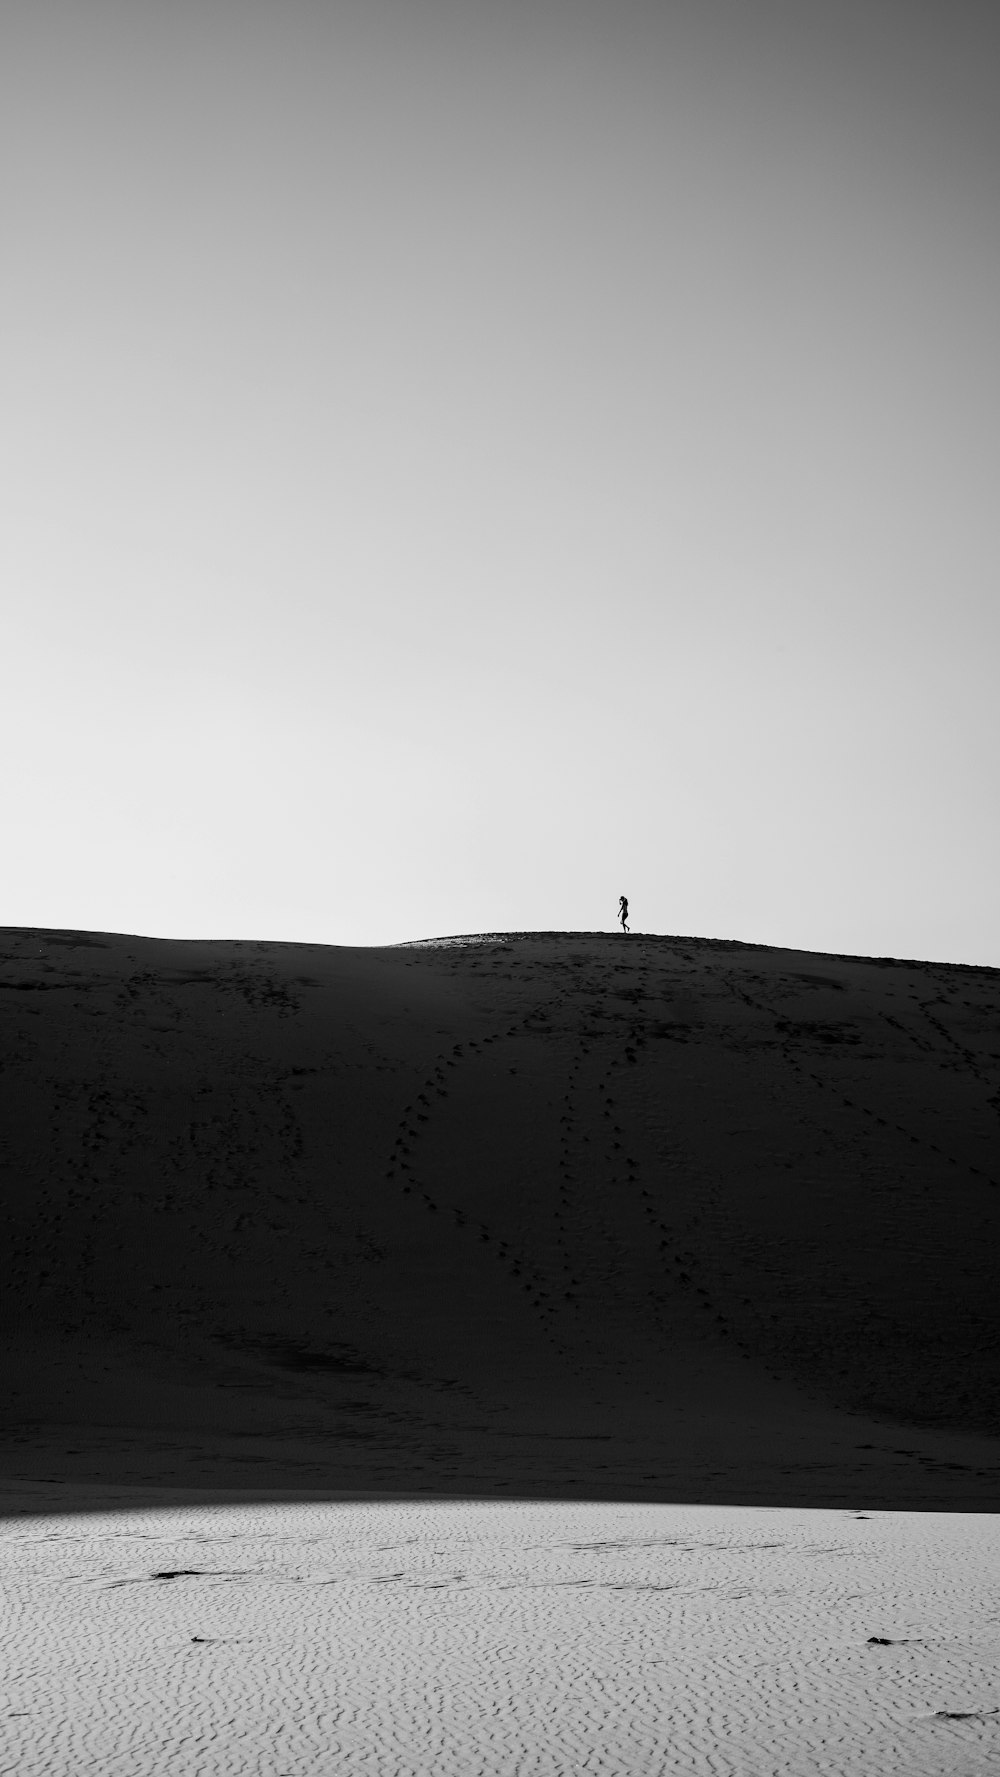 a person standing on top of a snow covered hill